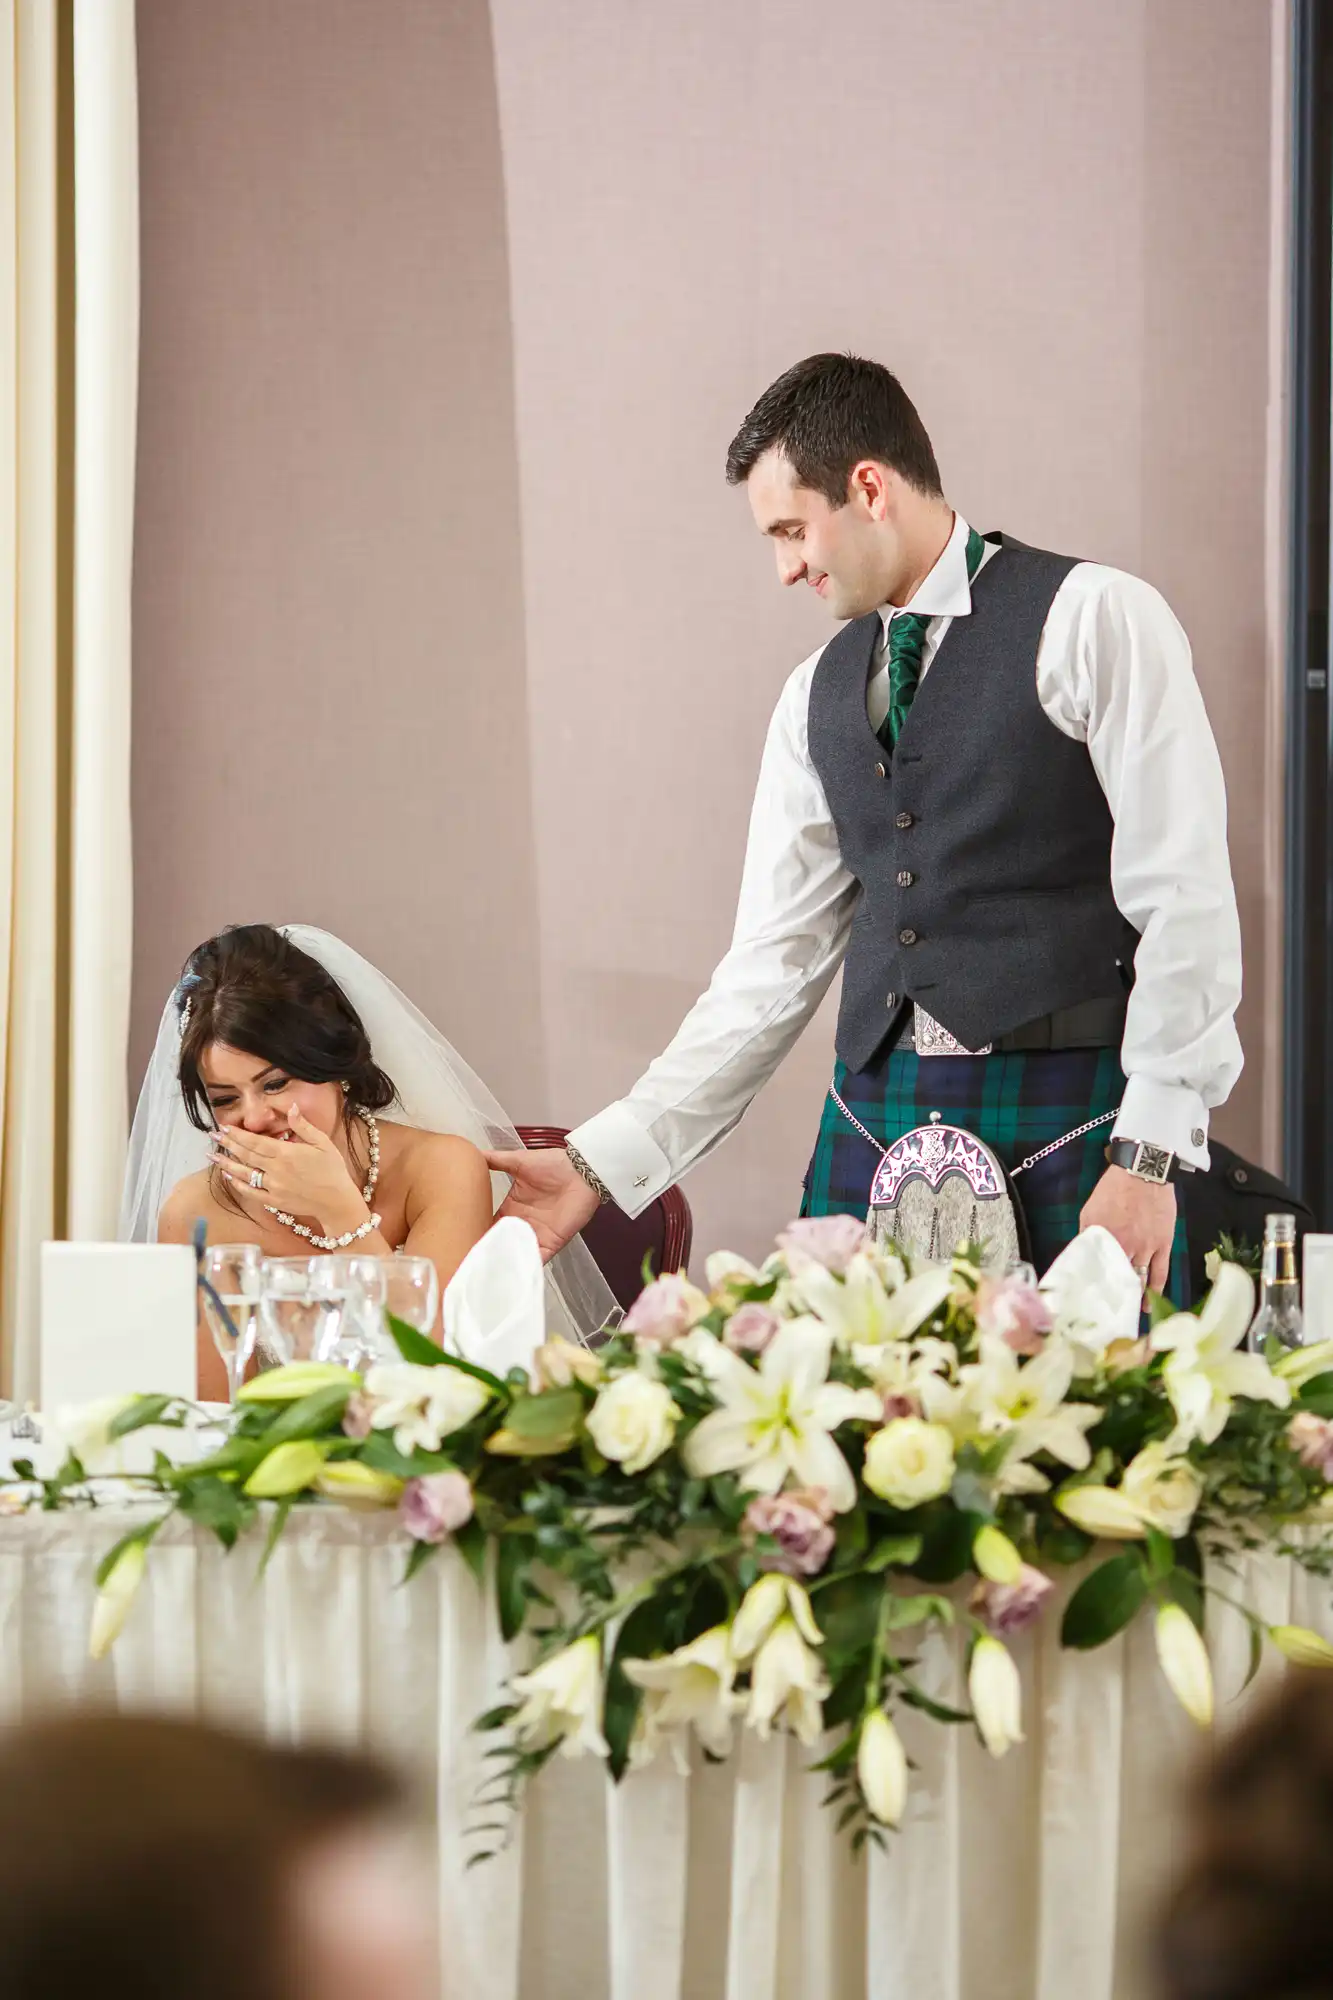 Groom in a kilt comforting bride sitting at wedding table, surrounded by flowers and white table settings.